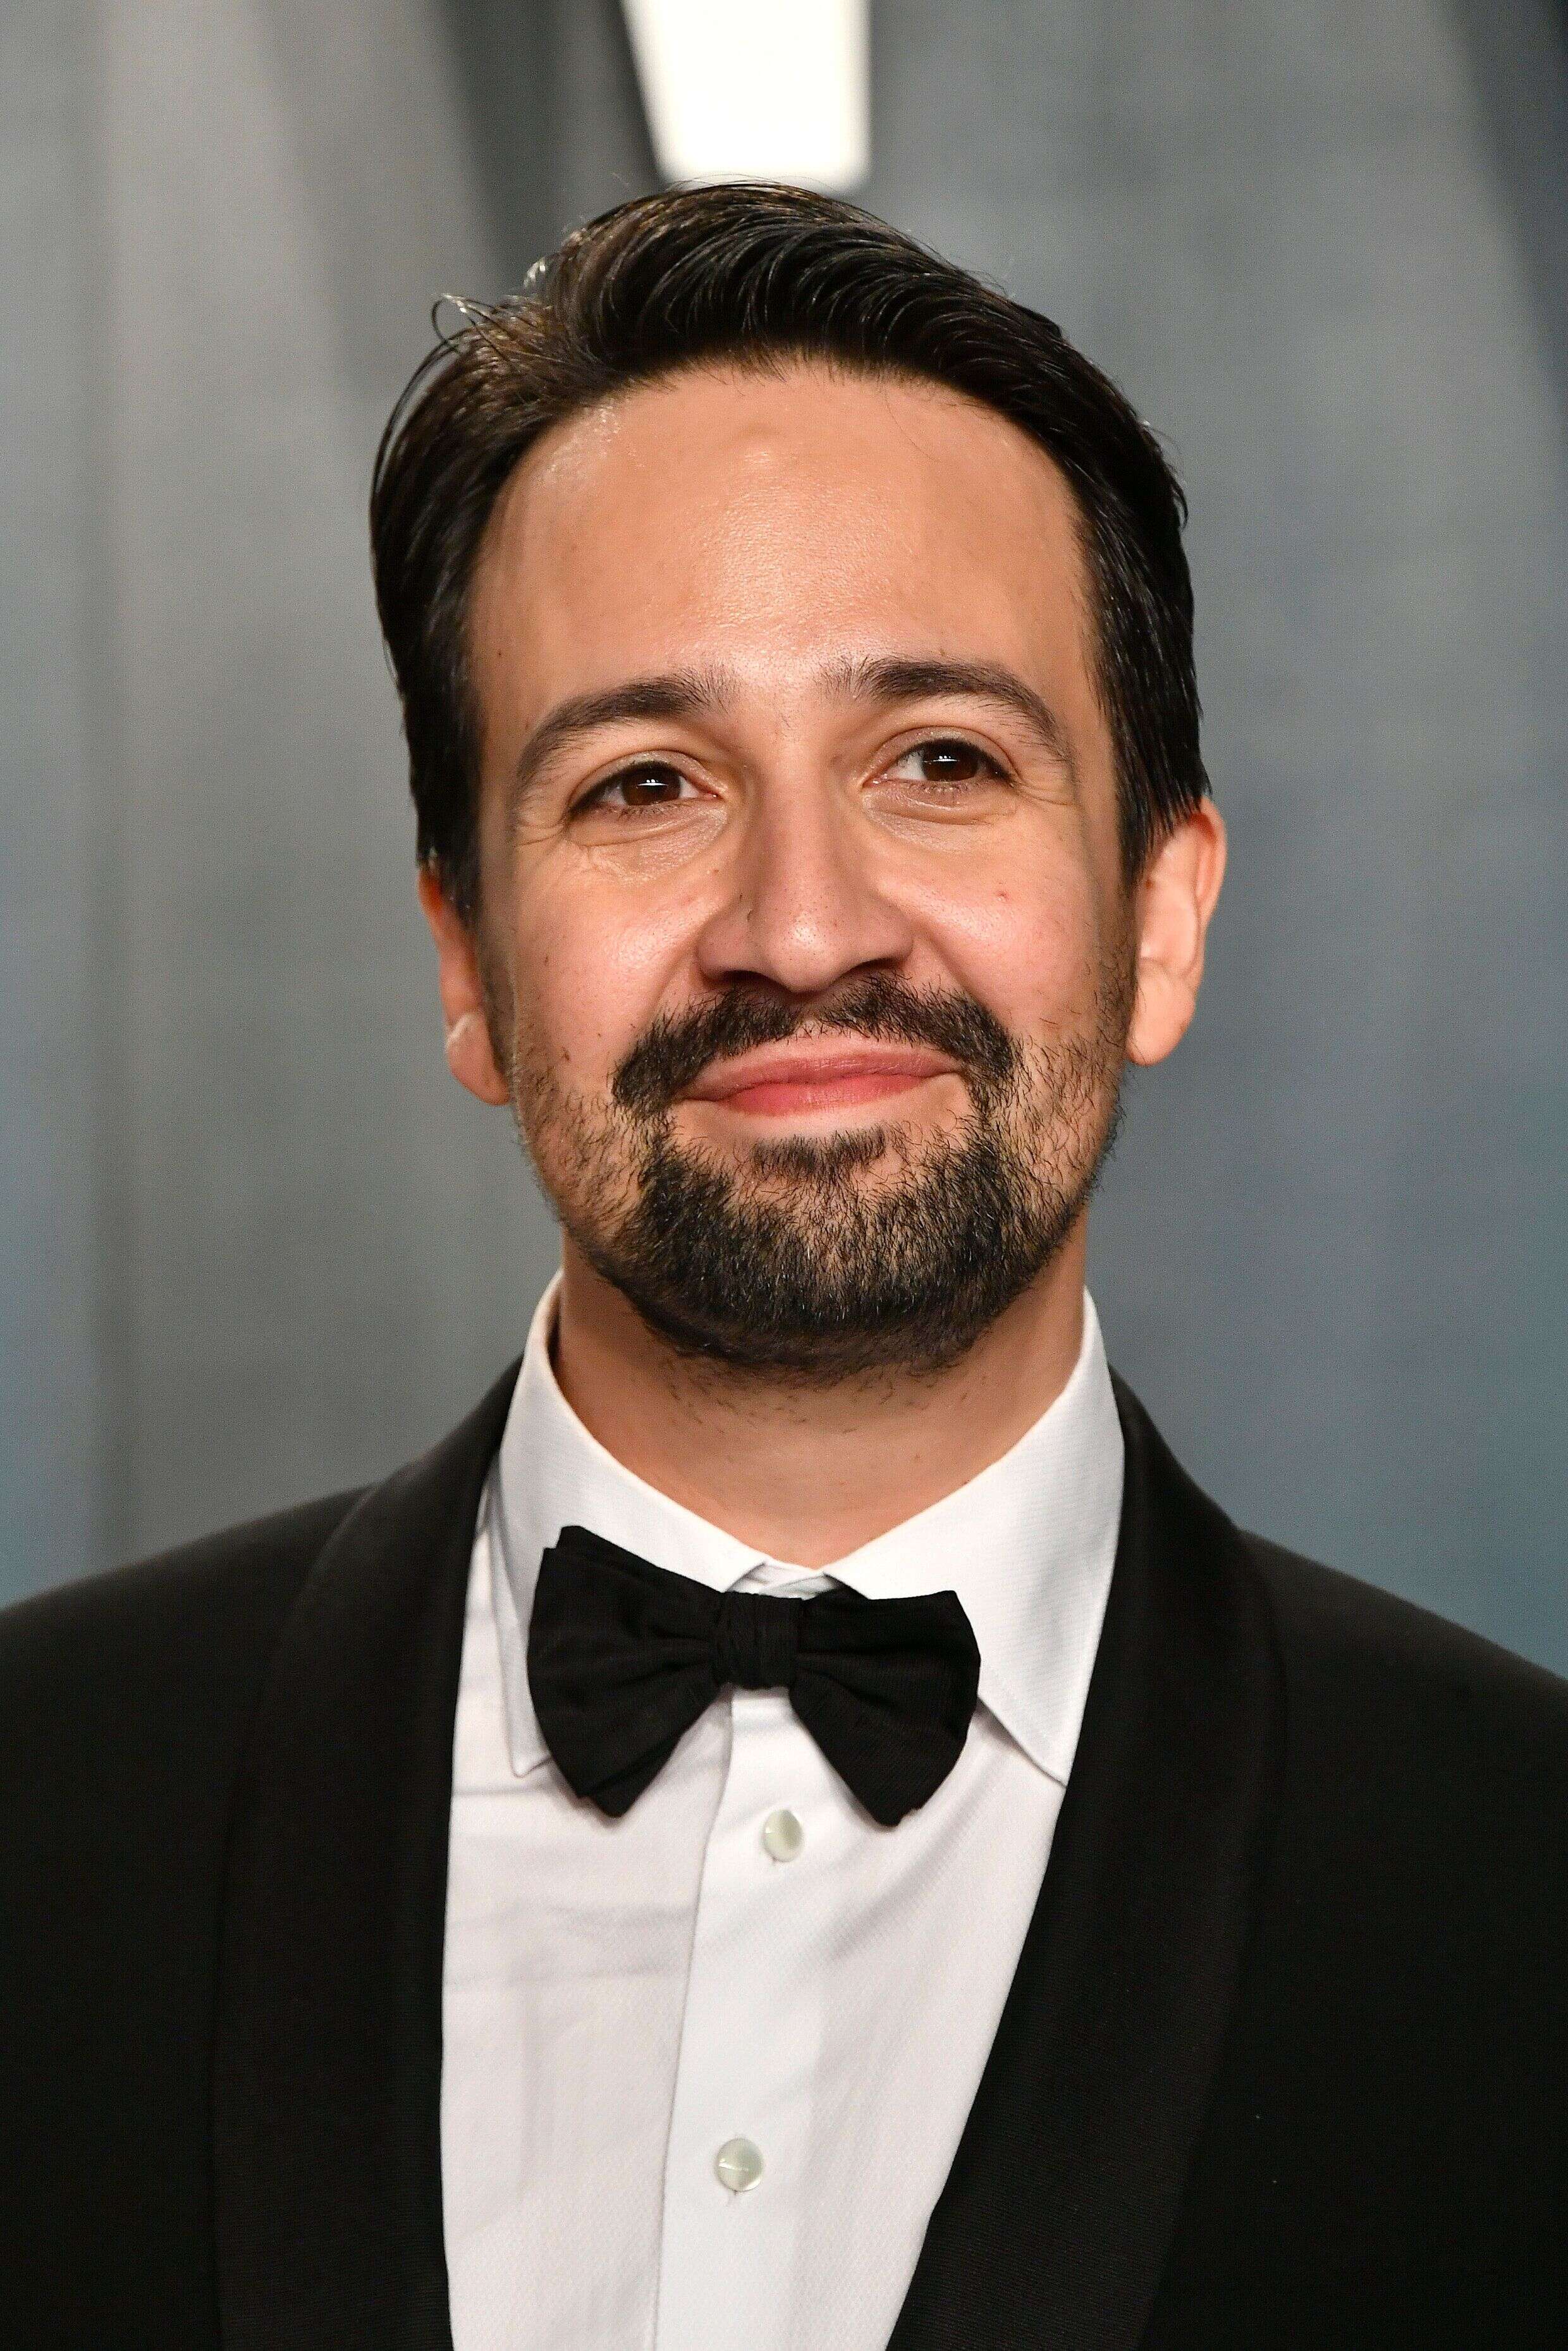 BEVERLY HILLS, CALIFORNIA - FEBRUARY 09: Lin-Manuel Miranda attends the 2020 Vanity Fair Oscar Party hosted by Radhika Jones at Wallis Annenberg Center for the Performing Arts on February 09, 2020 in Beverly Hills, California. (Photo by Frazer Harrison/Getty Images)